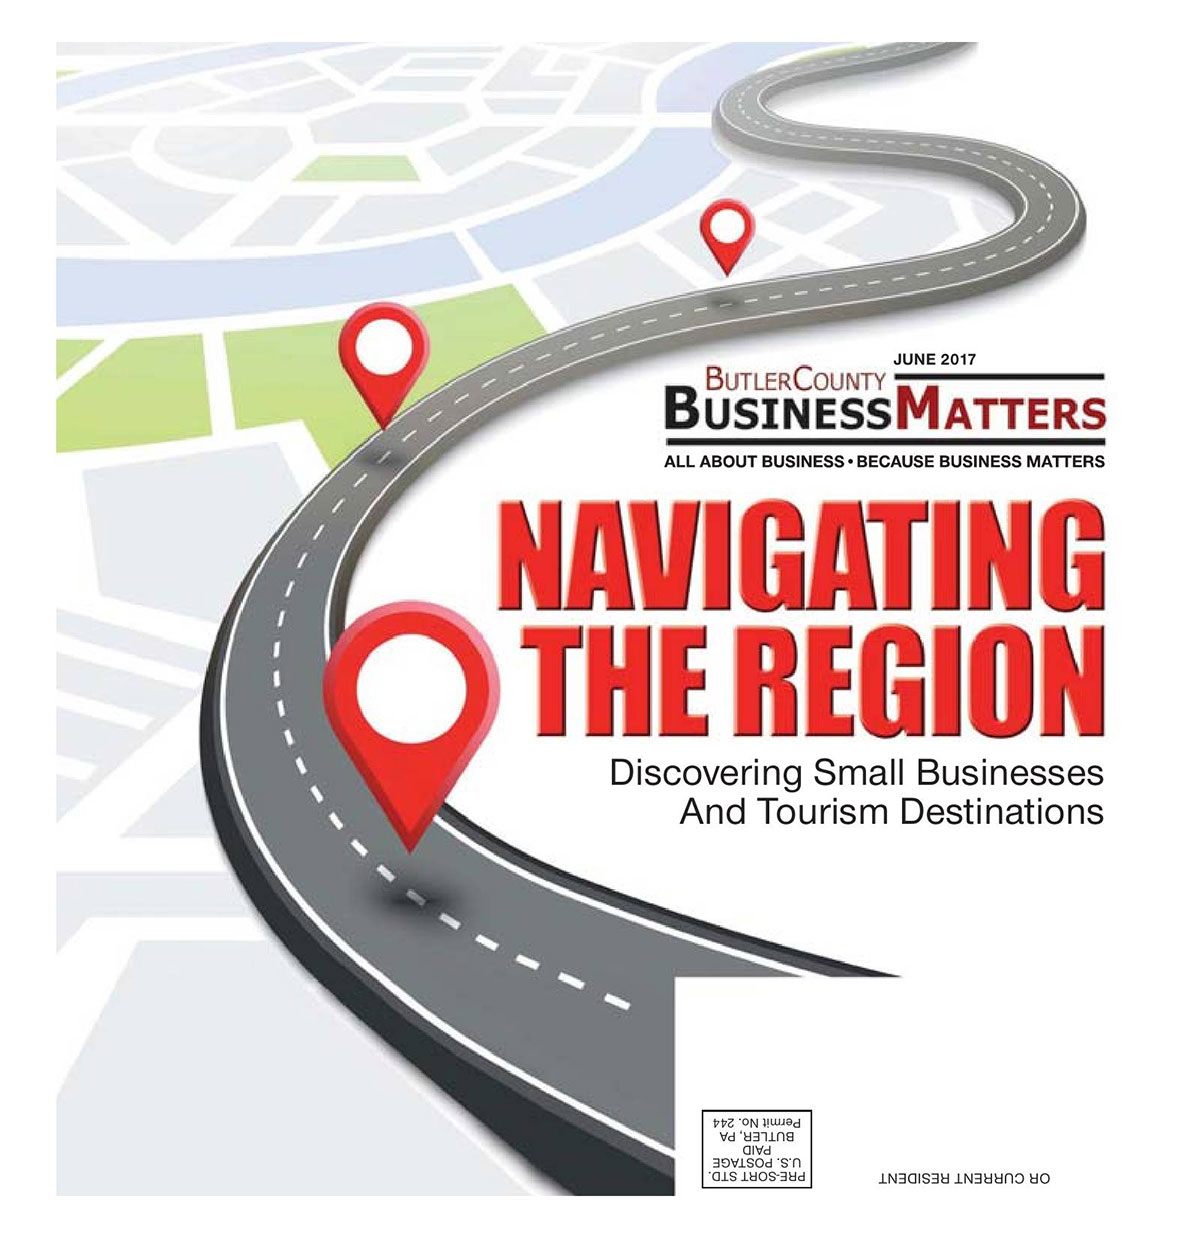 June 2017 - Navigating The Region - Discovering Small Businesses and Tourism Destinations